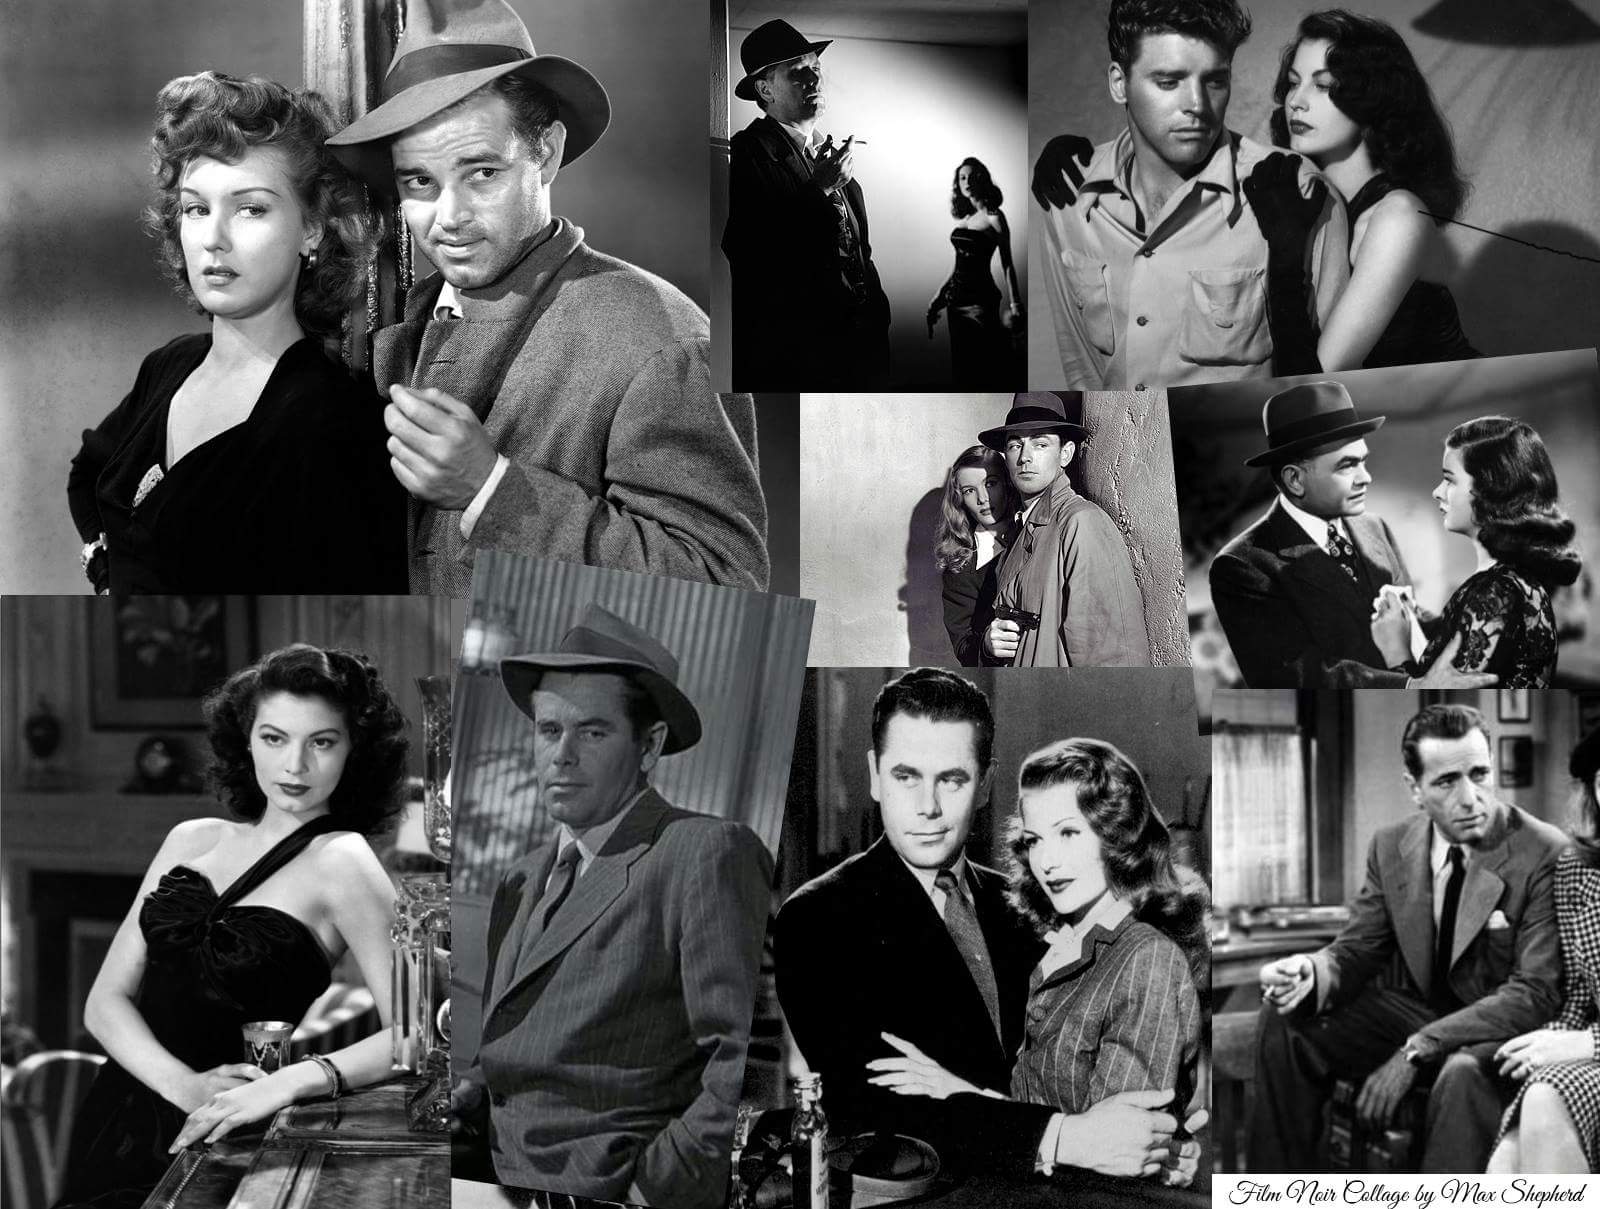 How To That Film Noir Effect When Producing and Editing Video — Video Production Marketing Company NYC, New York, NJ, Jersey